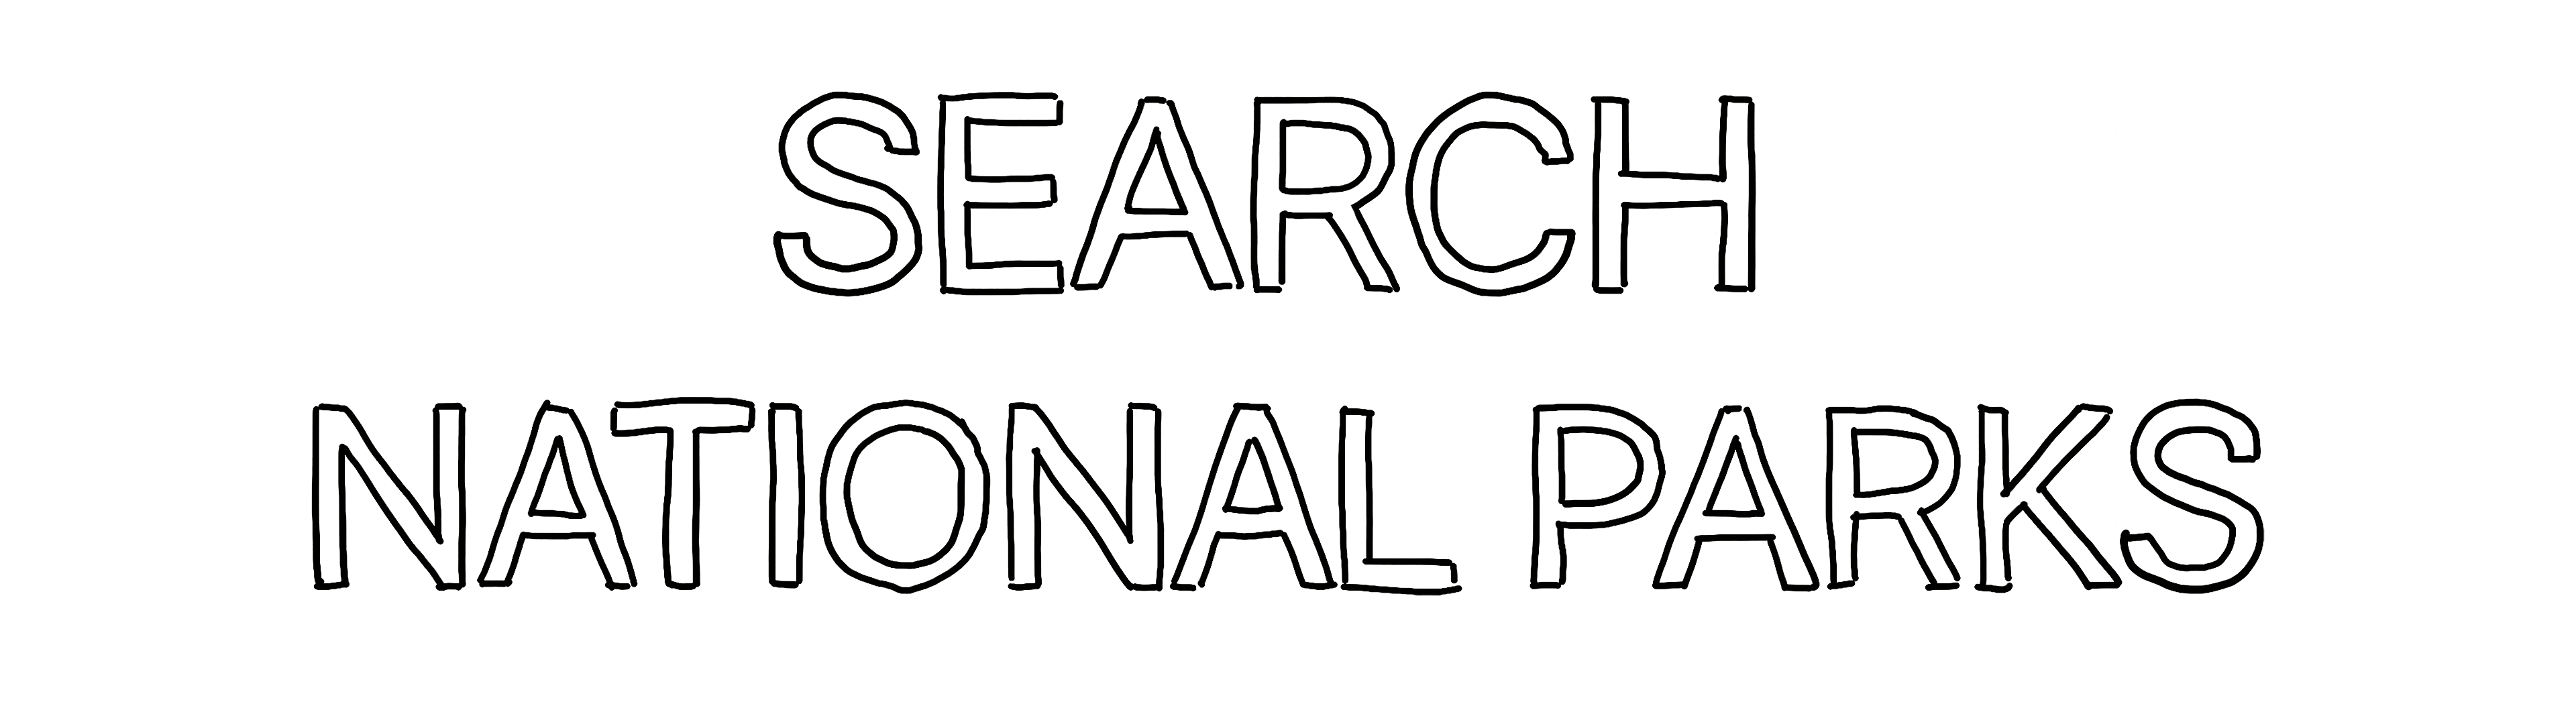 Search National Parks